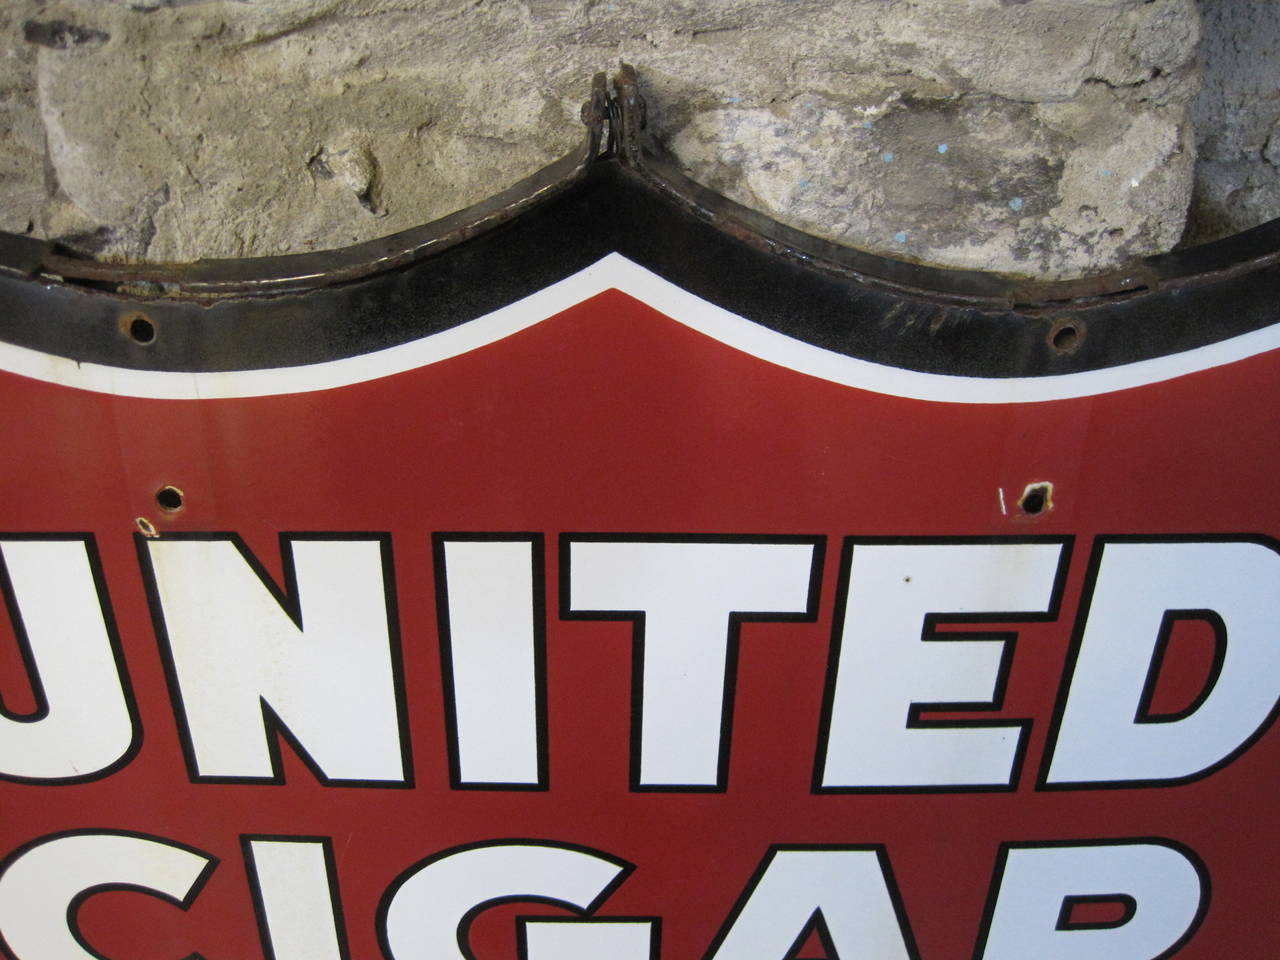 united cigar stores company of america